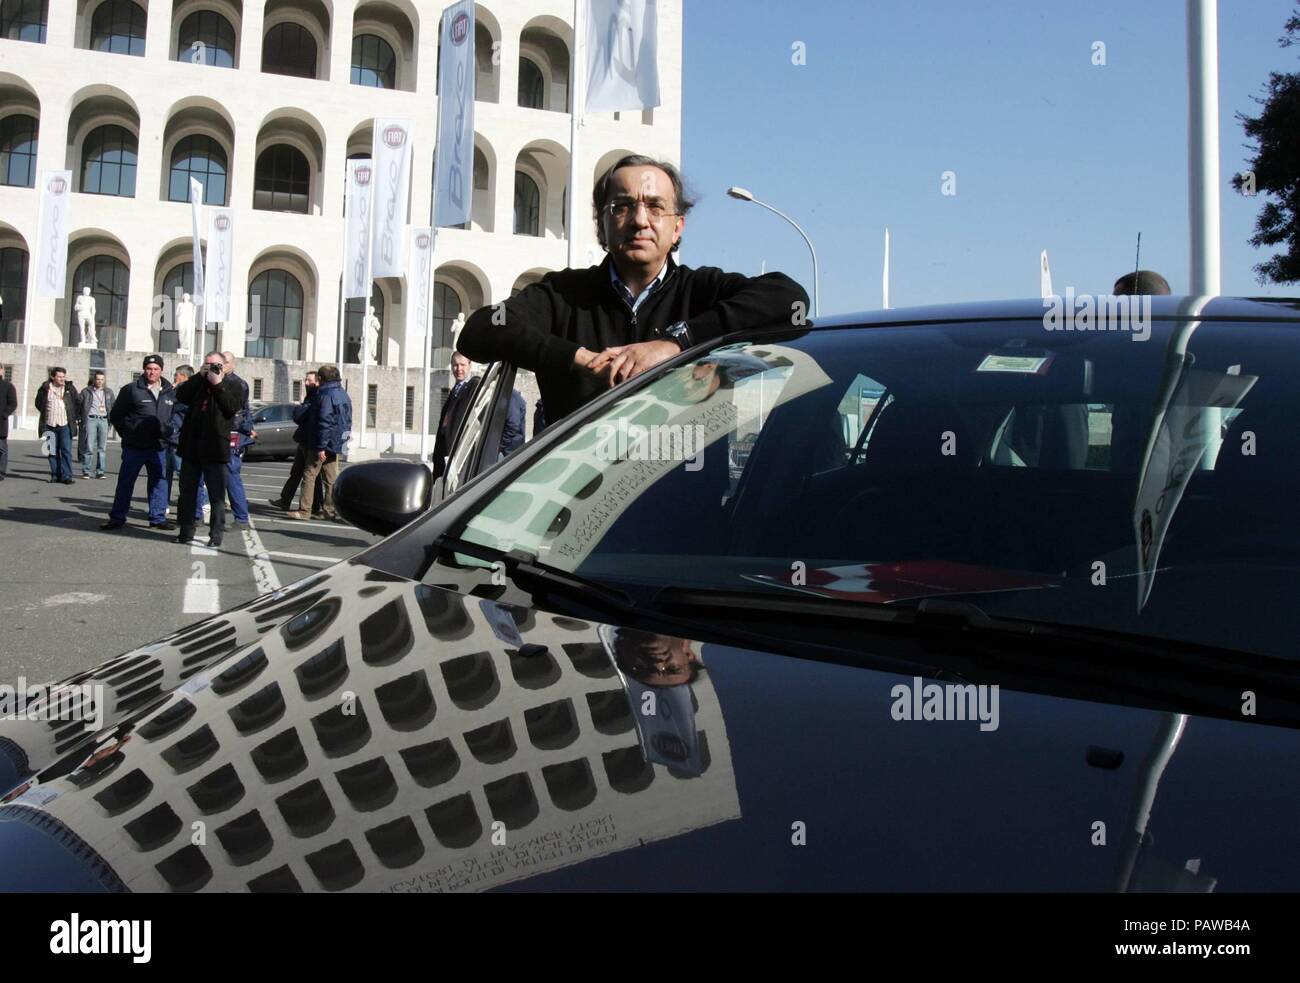 PRESENTATION FIAT BRAVO IN THE PHOTO SERGIO MARCHIONNE CEO FIAT WITH THE MACHINE (Mario Maci, ROME - 2007-01-31) ps the photo can be used respecting the context in which it was taken, and without the defamatory intent of the decoration of the people represented (Mario Maci, Foto Repertorio - 2018-07-25) ps the photo can be used respecting the context in which it was taken, and without the defamatory intent of the decoration of the people represented Stock Photo